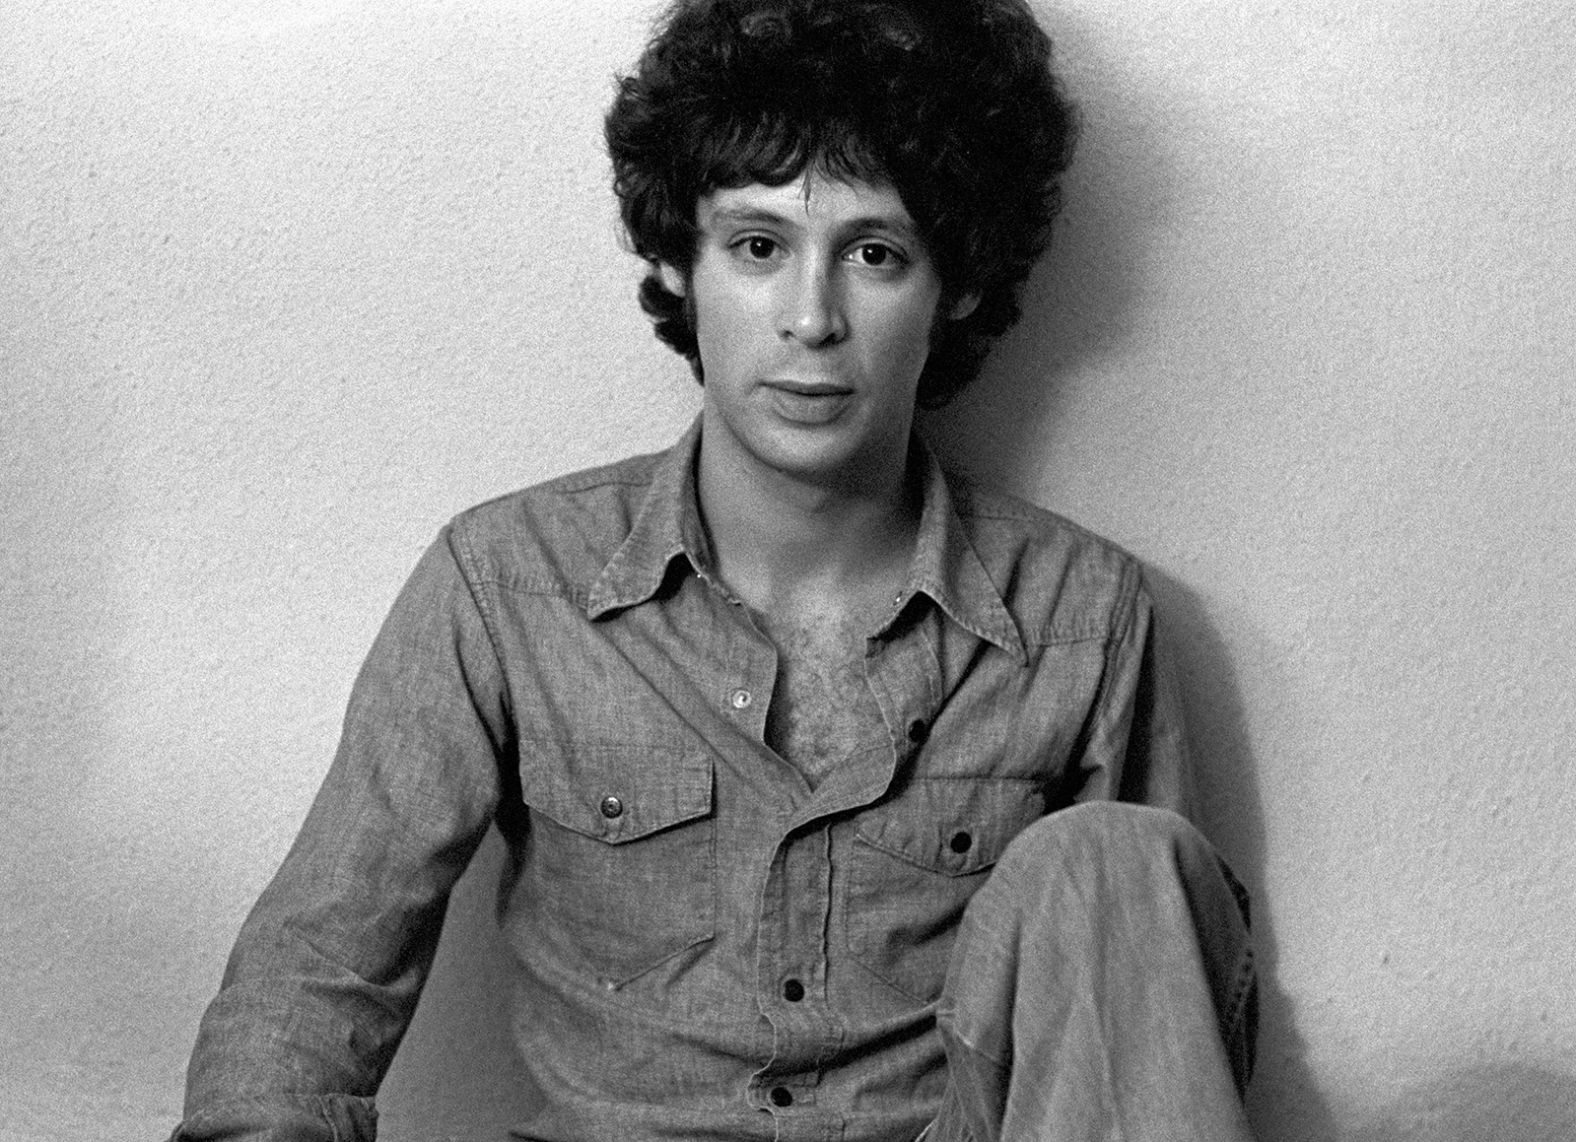 <a href="https://www.cnn.com/2024/03/11/entertainment/eric-carmen-death/index.html" target="_blank">Eric Carmen</a>, the former lead vocalist of The Raspberries and singer of "All by Myself," died at the age of 74, according to his website on March 11.